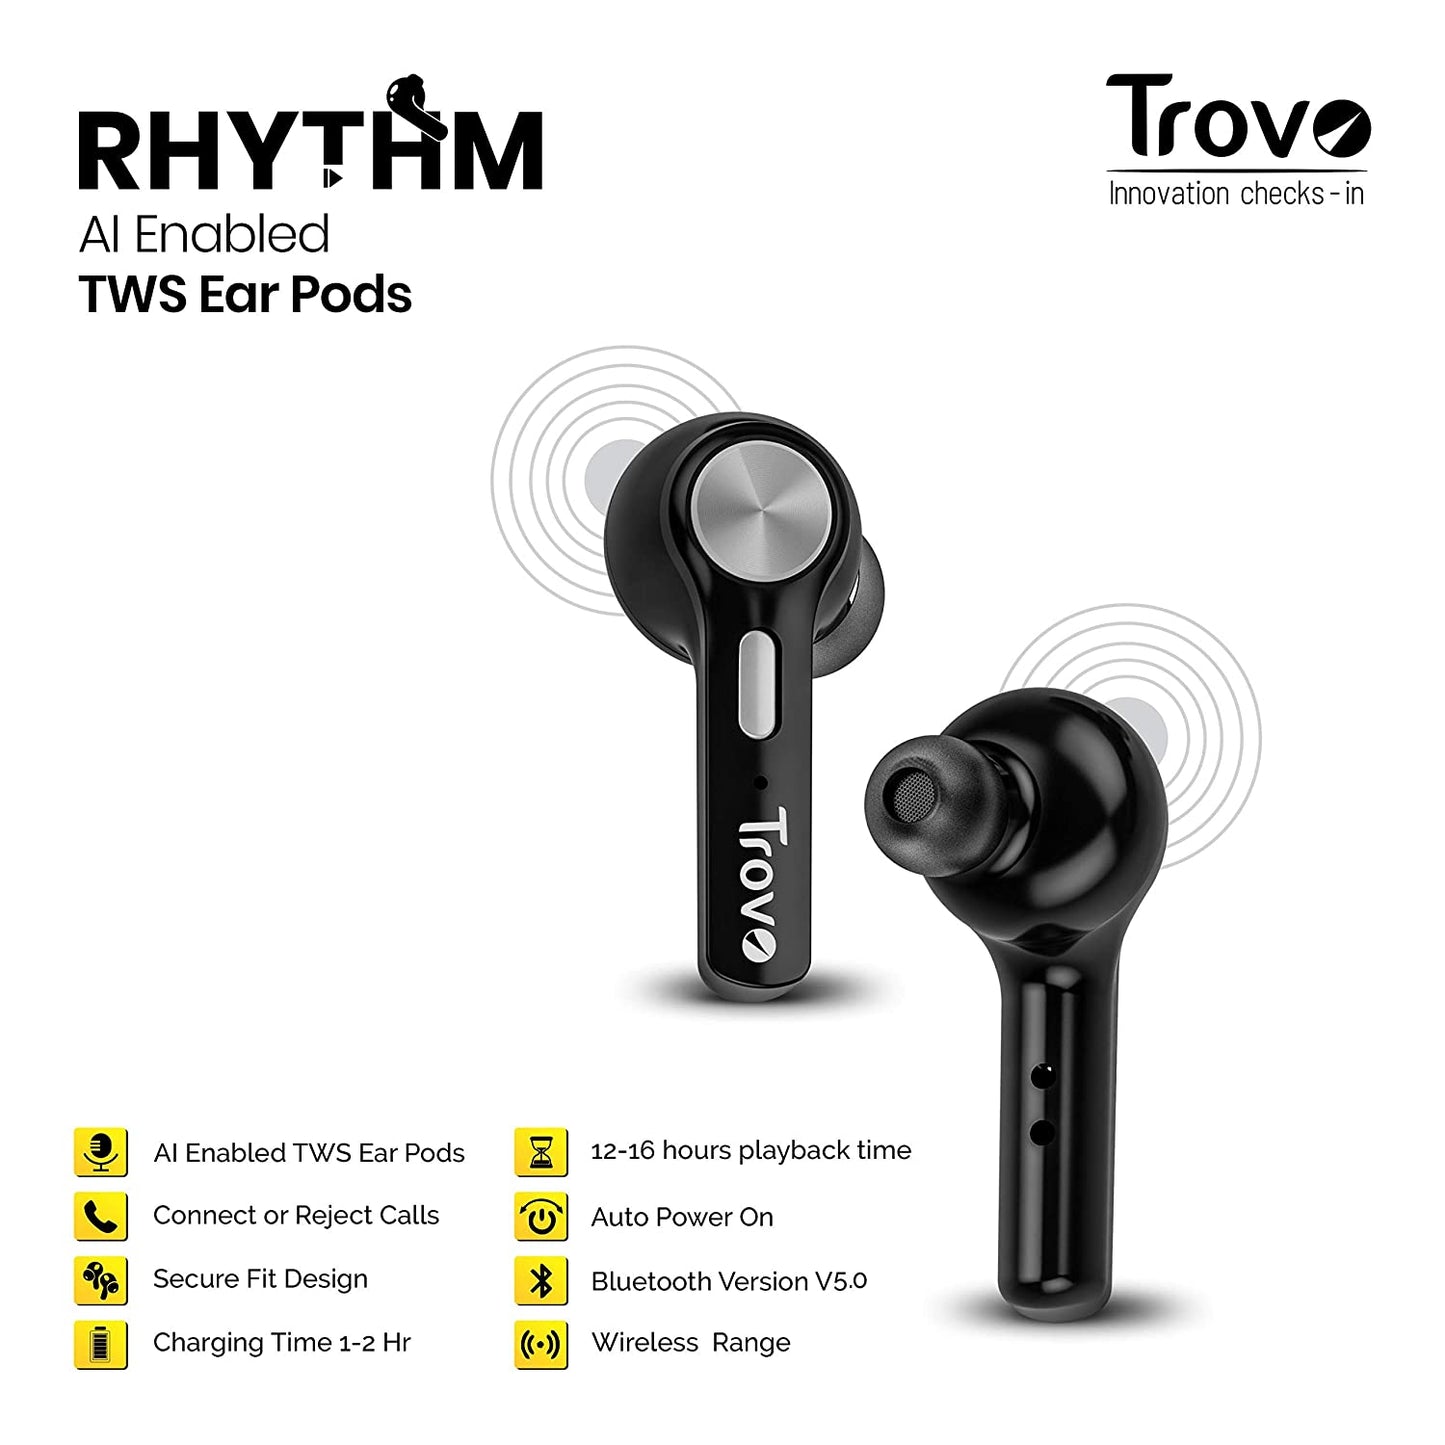 REP-35 Rhythm True Wireless Voice Assistant Bluetooth Headset with Mic & Charging Box (Black)